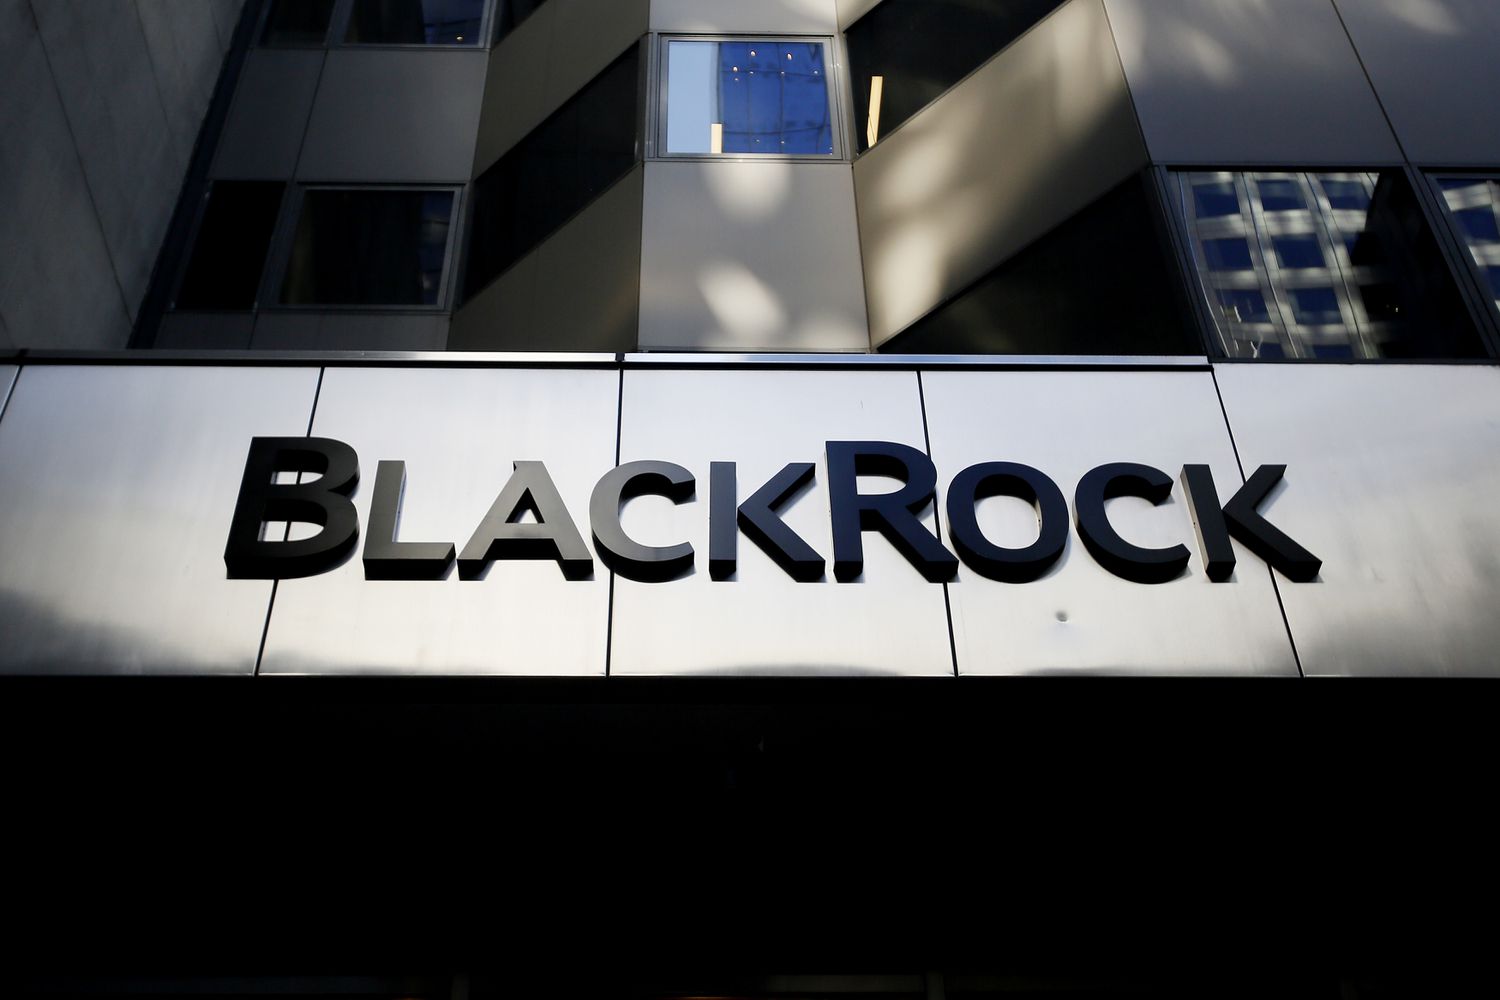 BlackRock, the world's largest asset manager, observes growing interest from sovereign wealth funds and pensions in Bitcoin ETFs. With over $76 billion invested in Bitcoin ETFs, competition intensifies between BlackRock's IBIT ETF and Grayscale's GBTC.